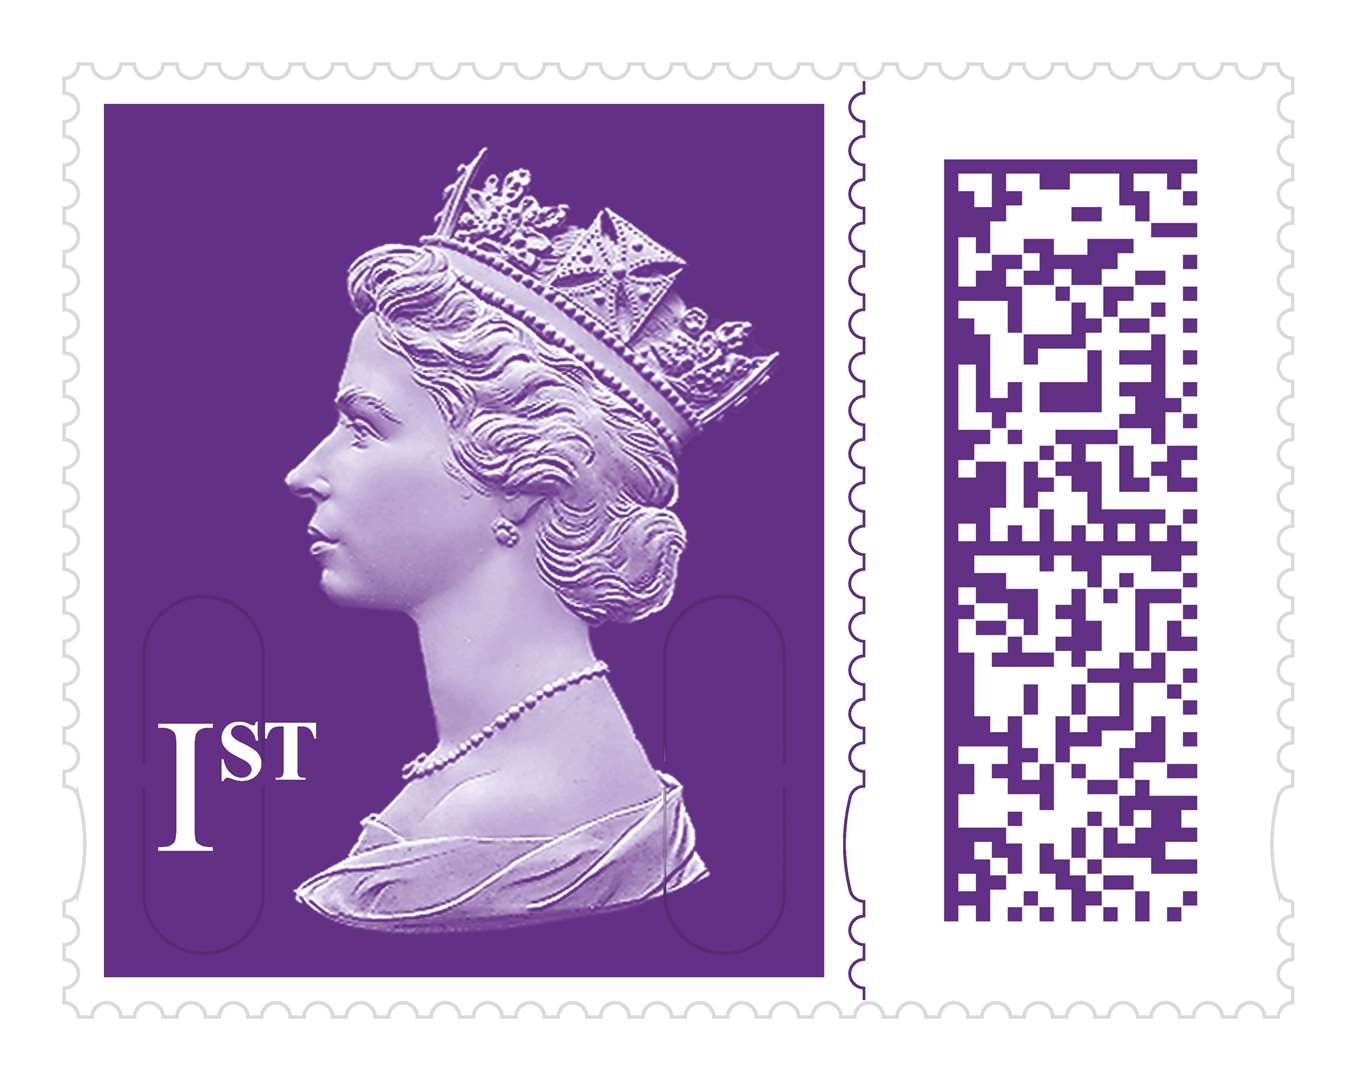 The new stamps will only be sold once existing stocks have been exhausted. Image: Royal Mail.